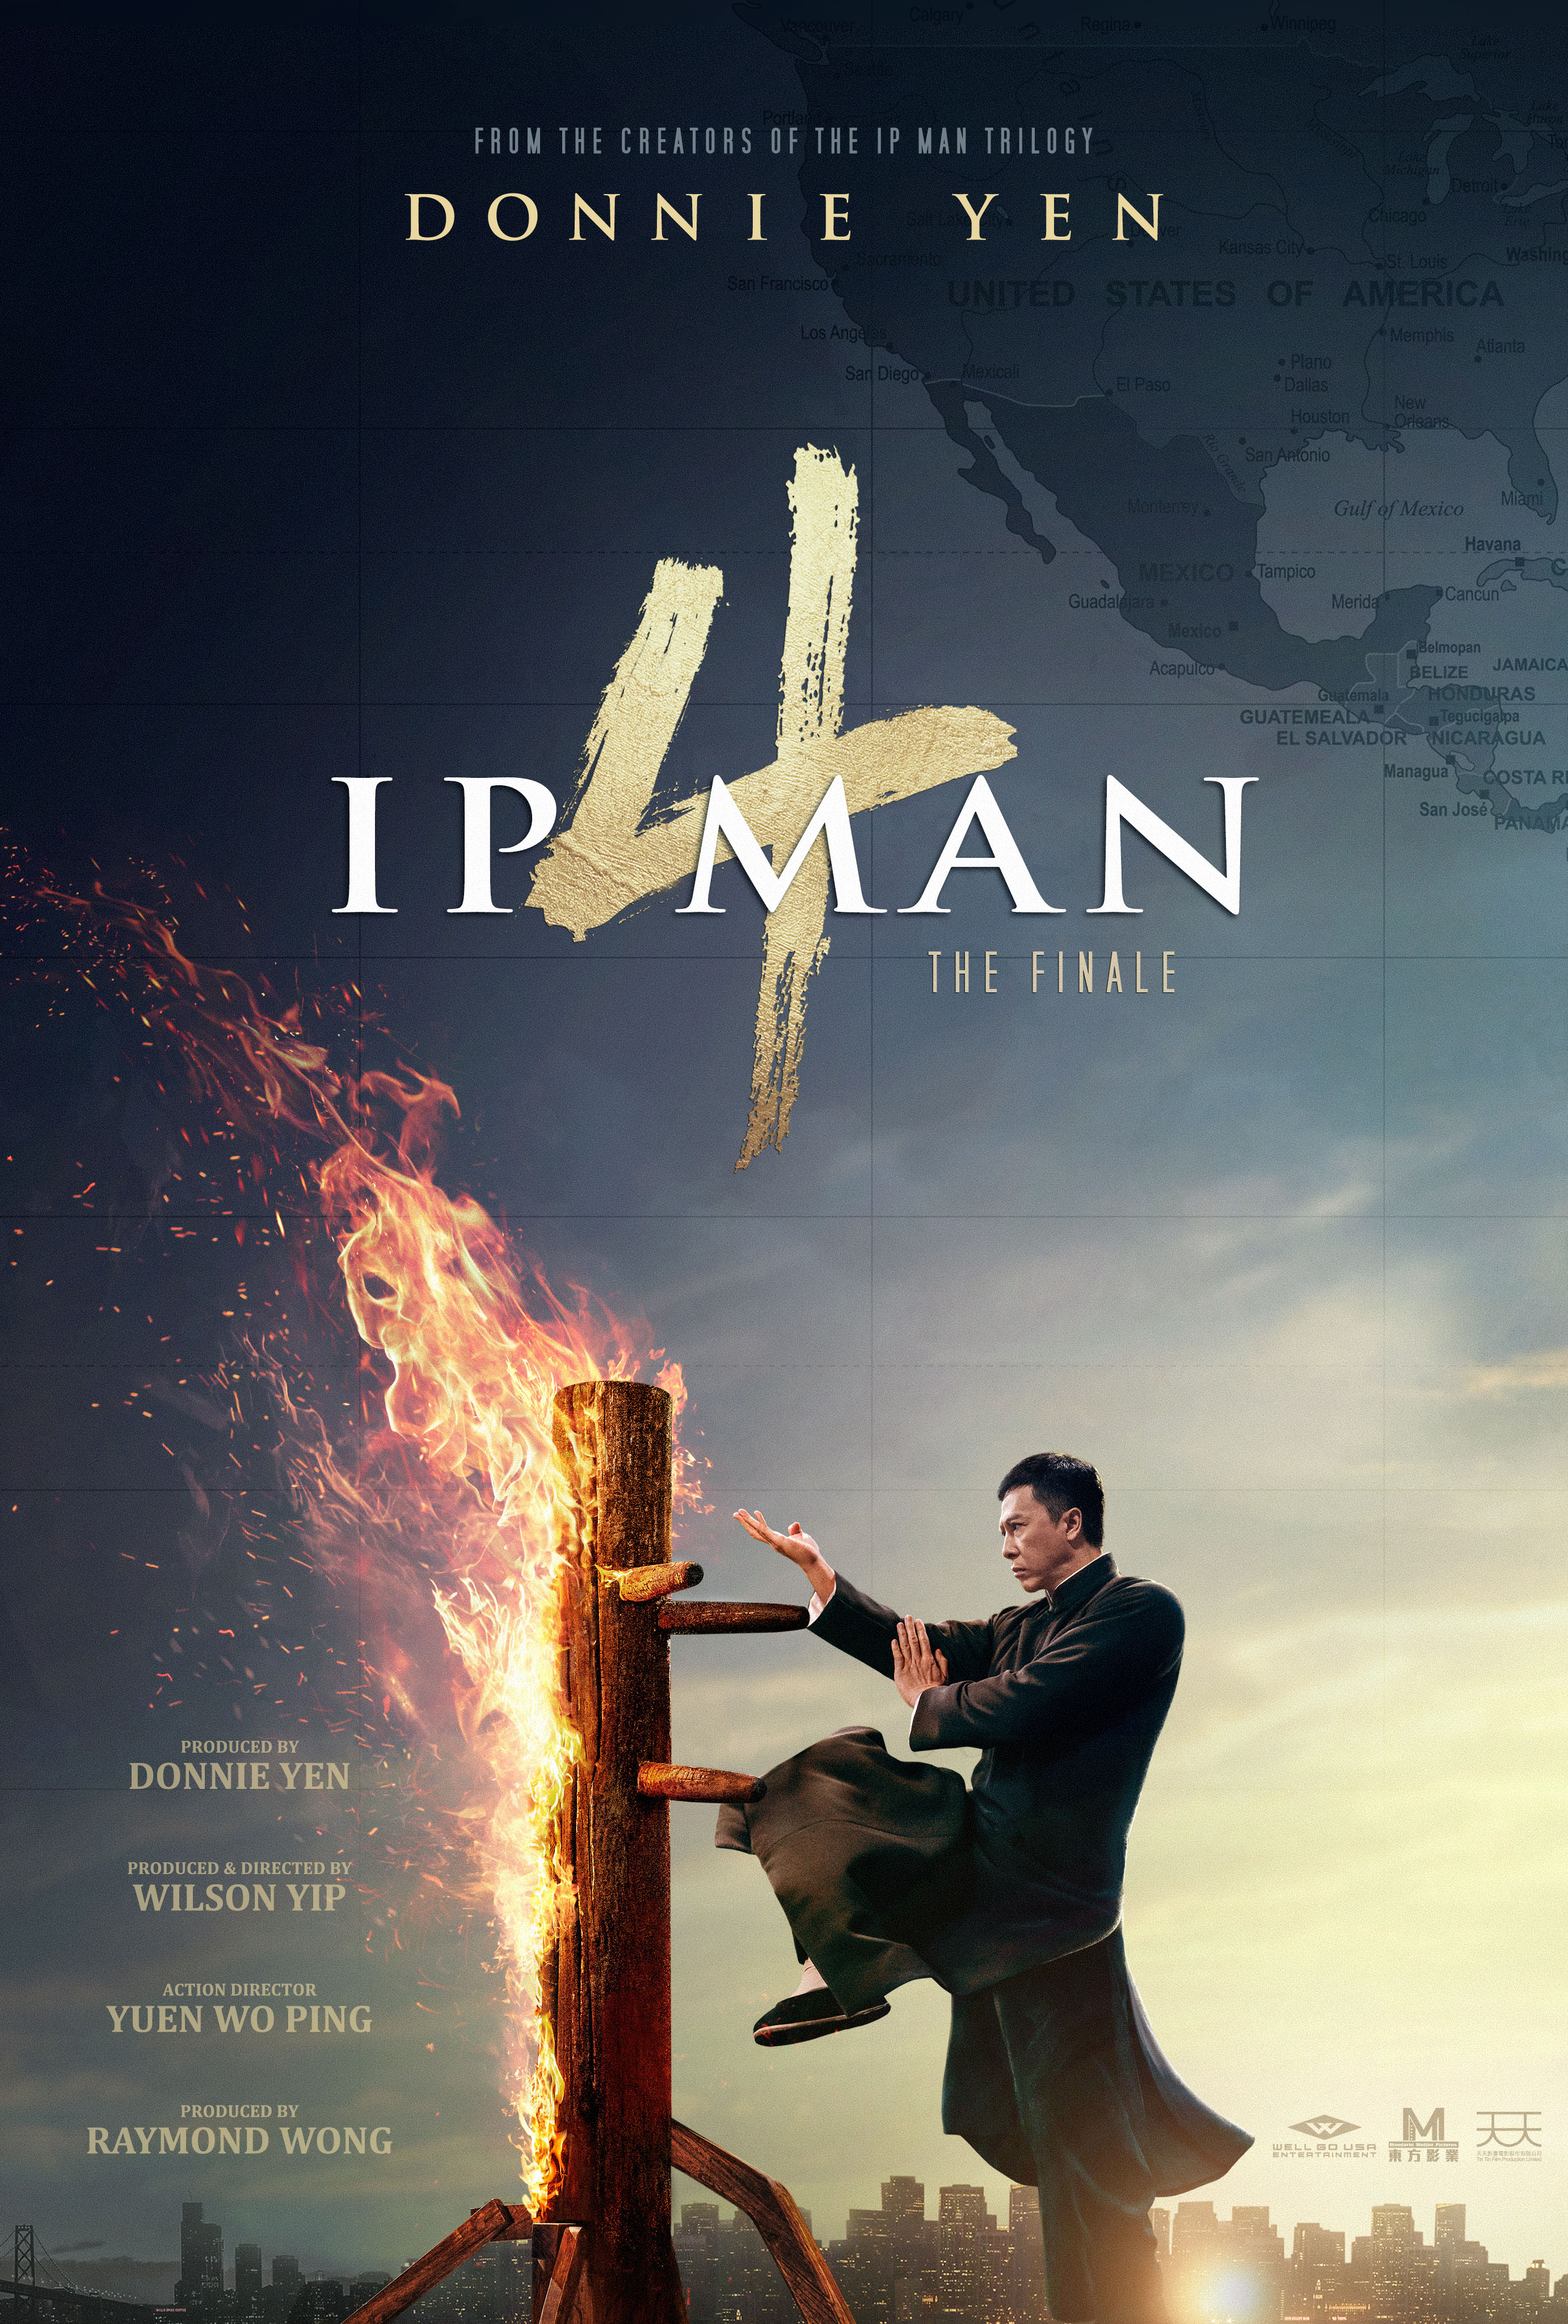 Ip Man 4 The Finale 2019 Dub in Hindi full movie download